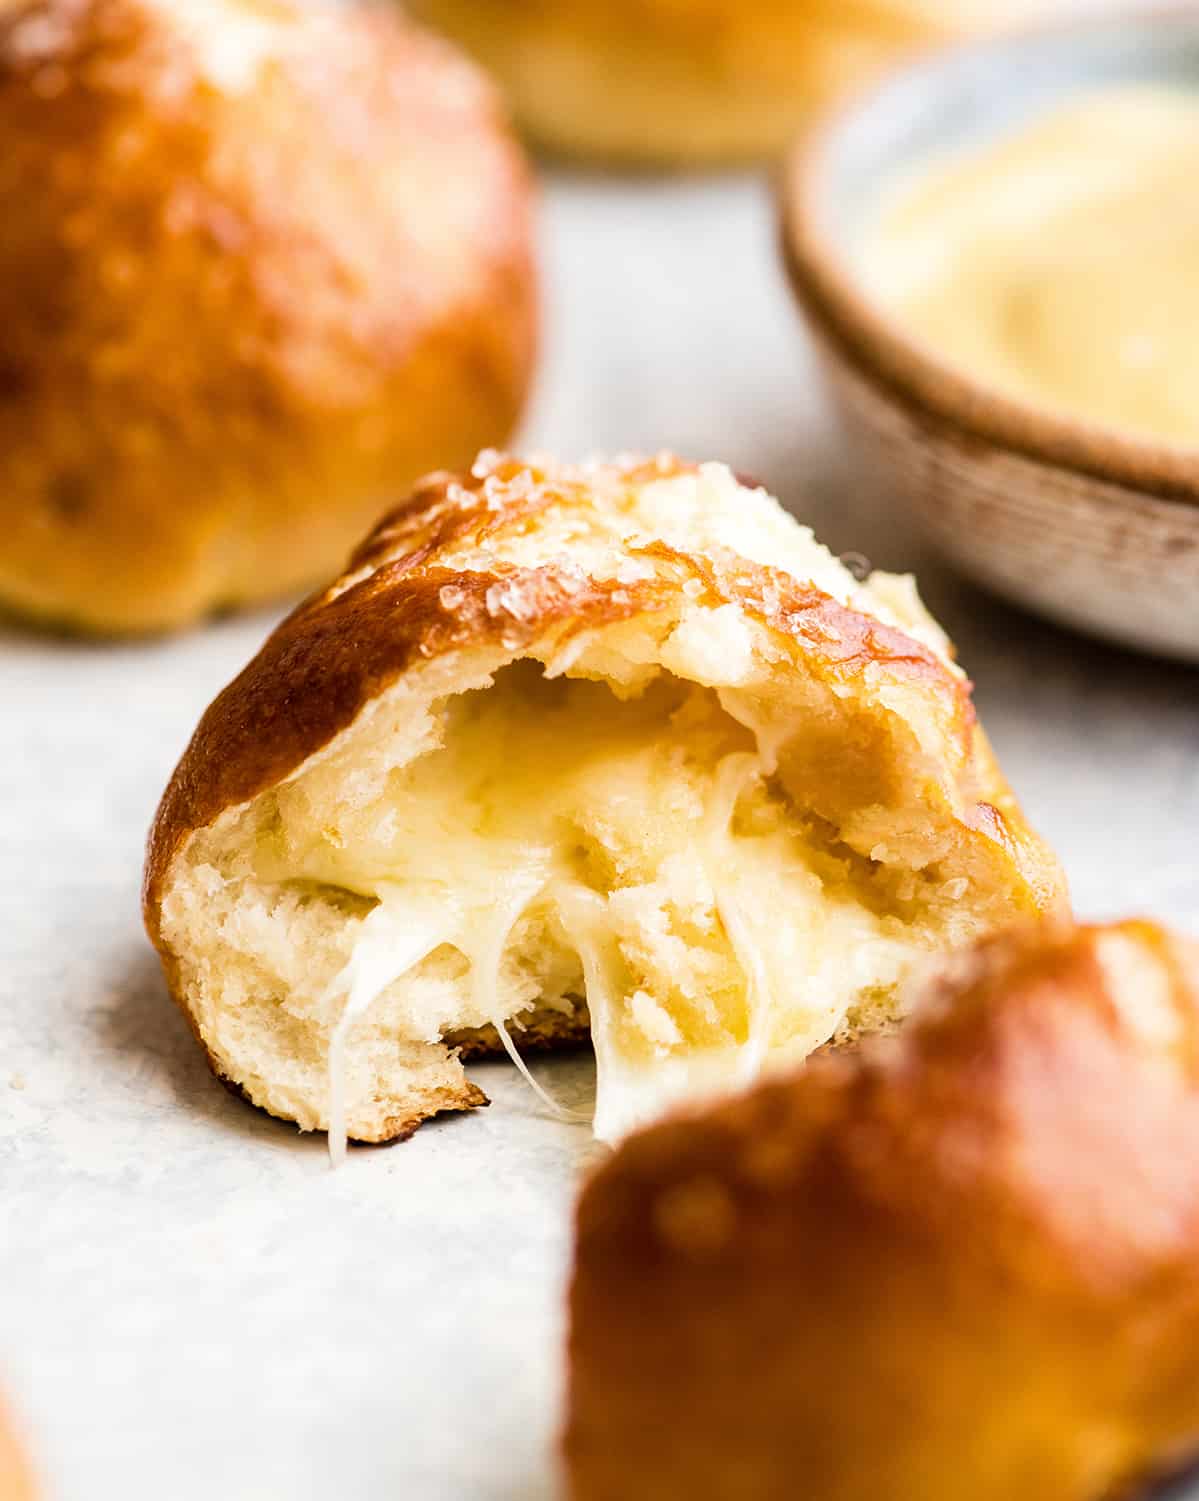 front view of a cheese-stuffed pretzel bite cut in half so the cheese in the center is visible